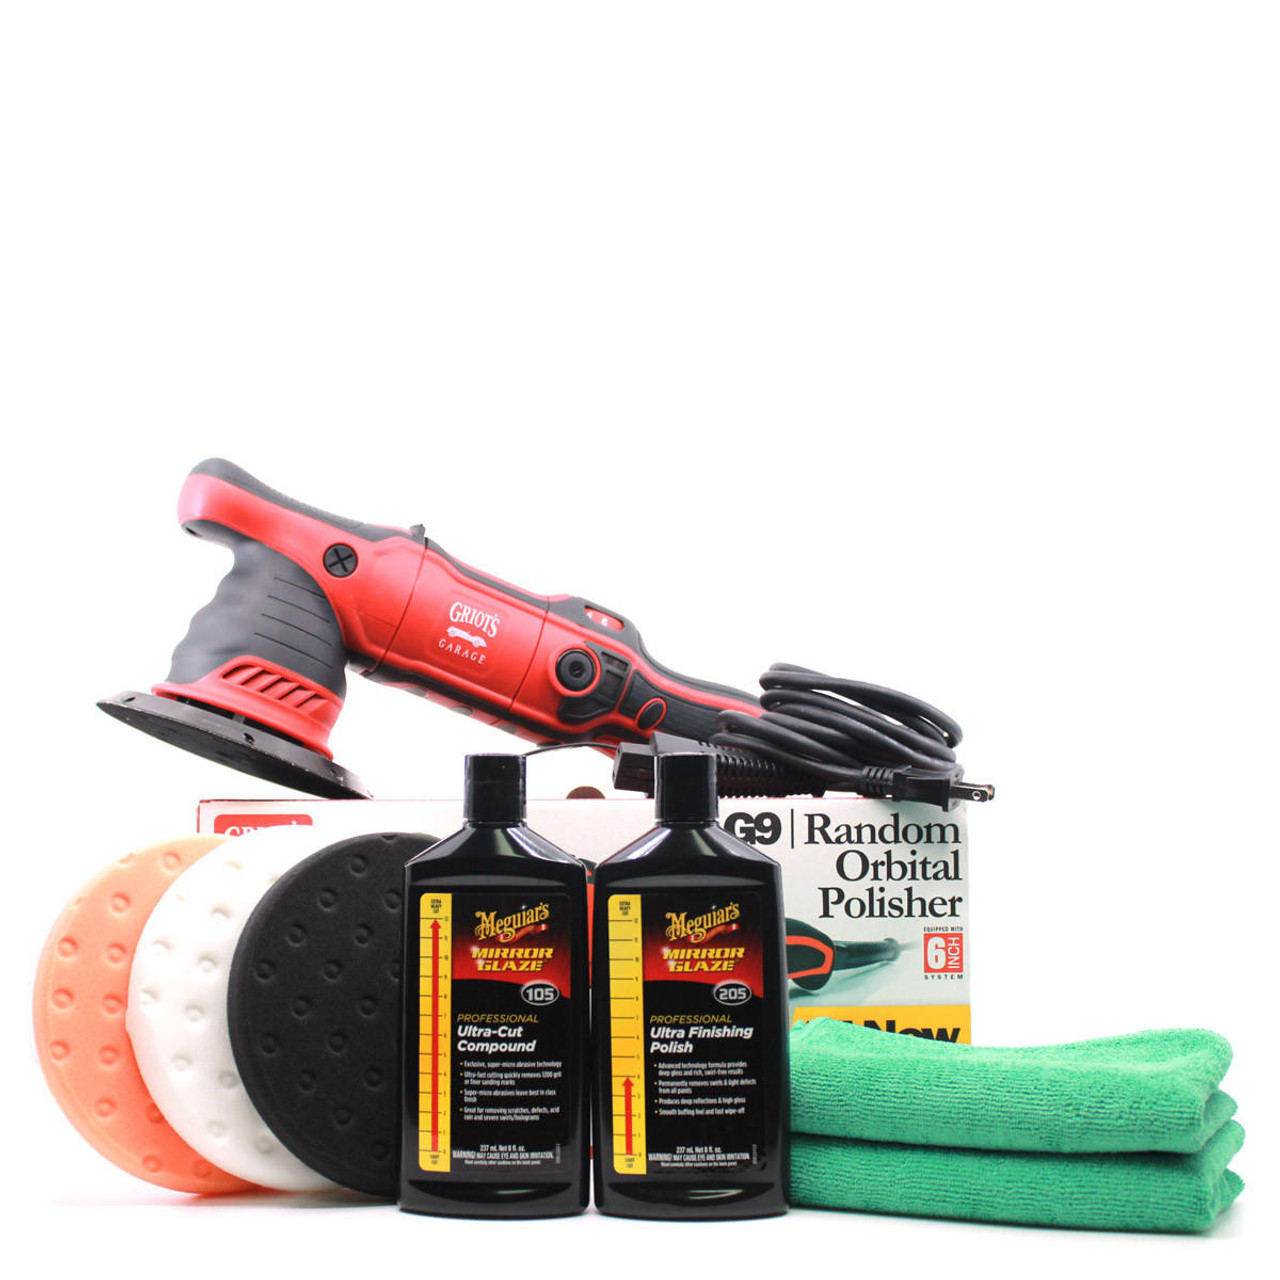 Meguiars Ultra Polish Kit with 6.5 Inch Pads